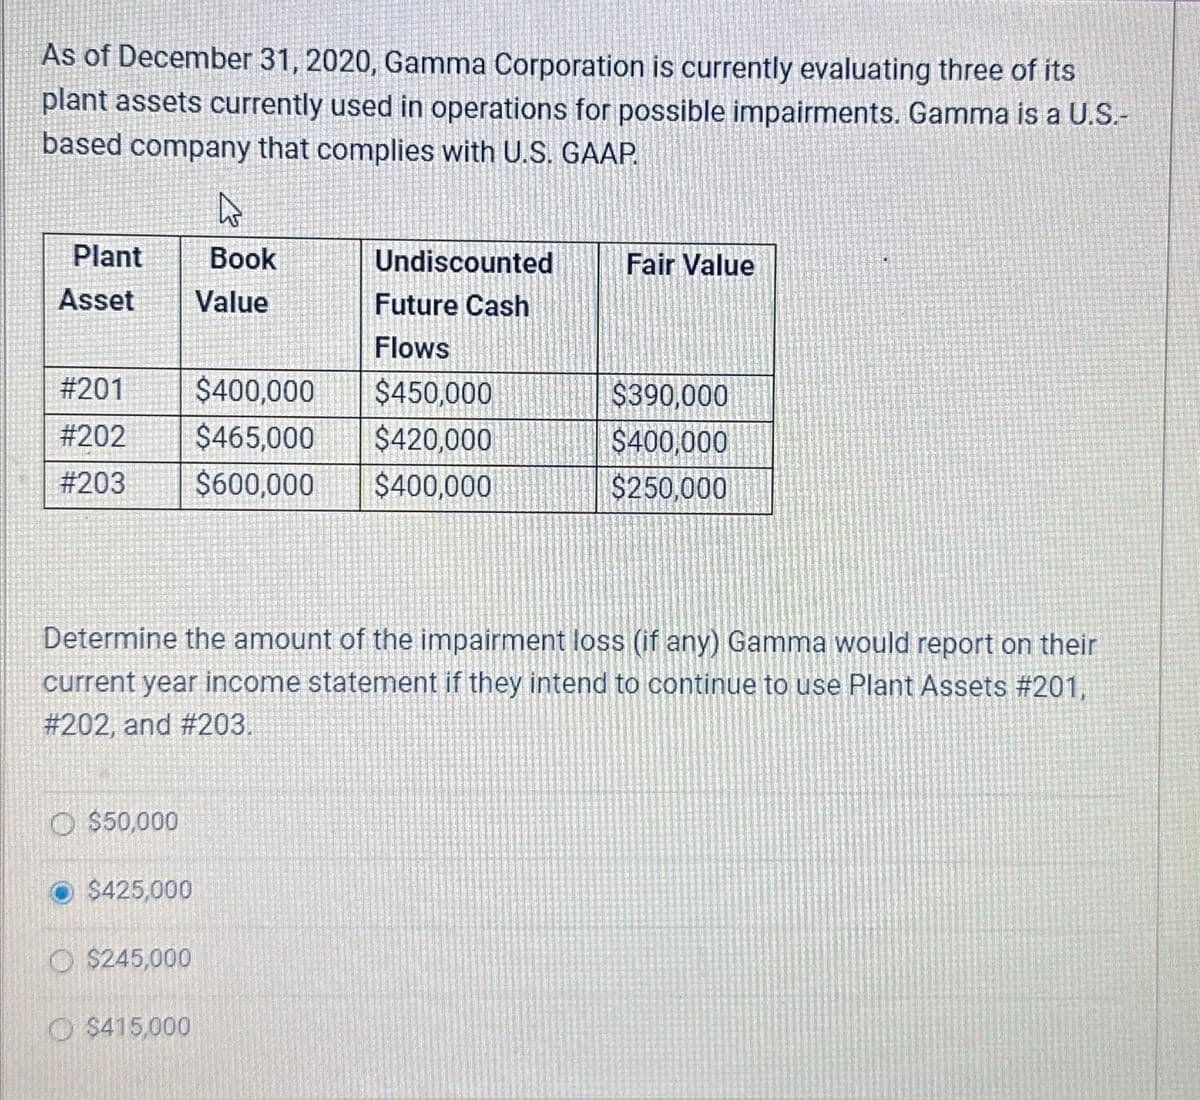 As of December 31, 2020, Gamma Corporation is currently evaluating three of its
plant assets currently used in operations for possible impairments. Gamma is a U.S.-
based company that complies with U.S. GAAP.
Plant
Asset
# 201
#202
# 203
Ⓒ$50,000
$425,000
$245,000
4
Book
$415,000
Undiscounted
Future Cash
Flows
$400,000 $450,000
$465,000
$420,000
$600,000
$400,000
Determine the amount of the impairment loss (if any) Gamma would report on their
current year income statement if they intend to continue to use Plant Assets #201,
# 202, and # 203.
Value
Fair Value
$390,000
$400,000
$250,000